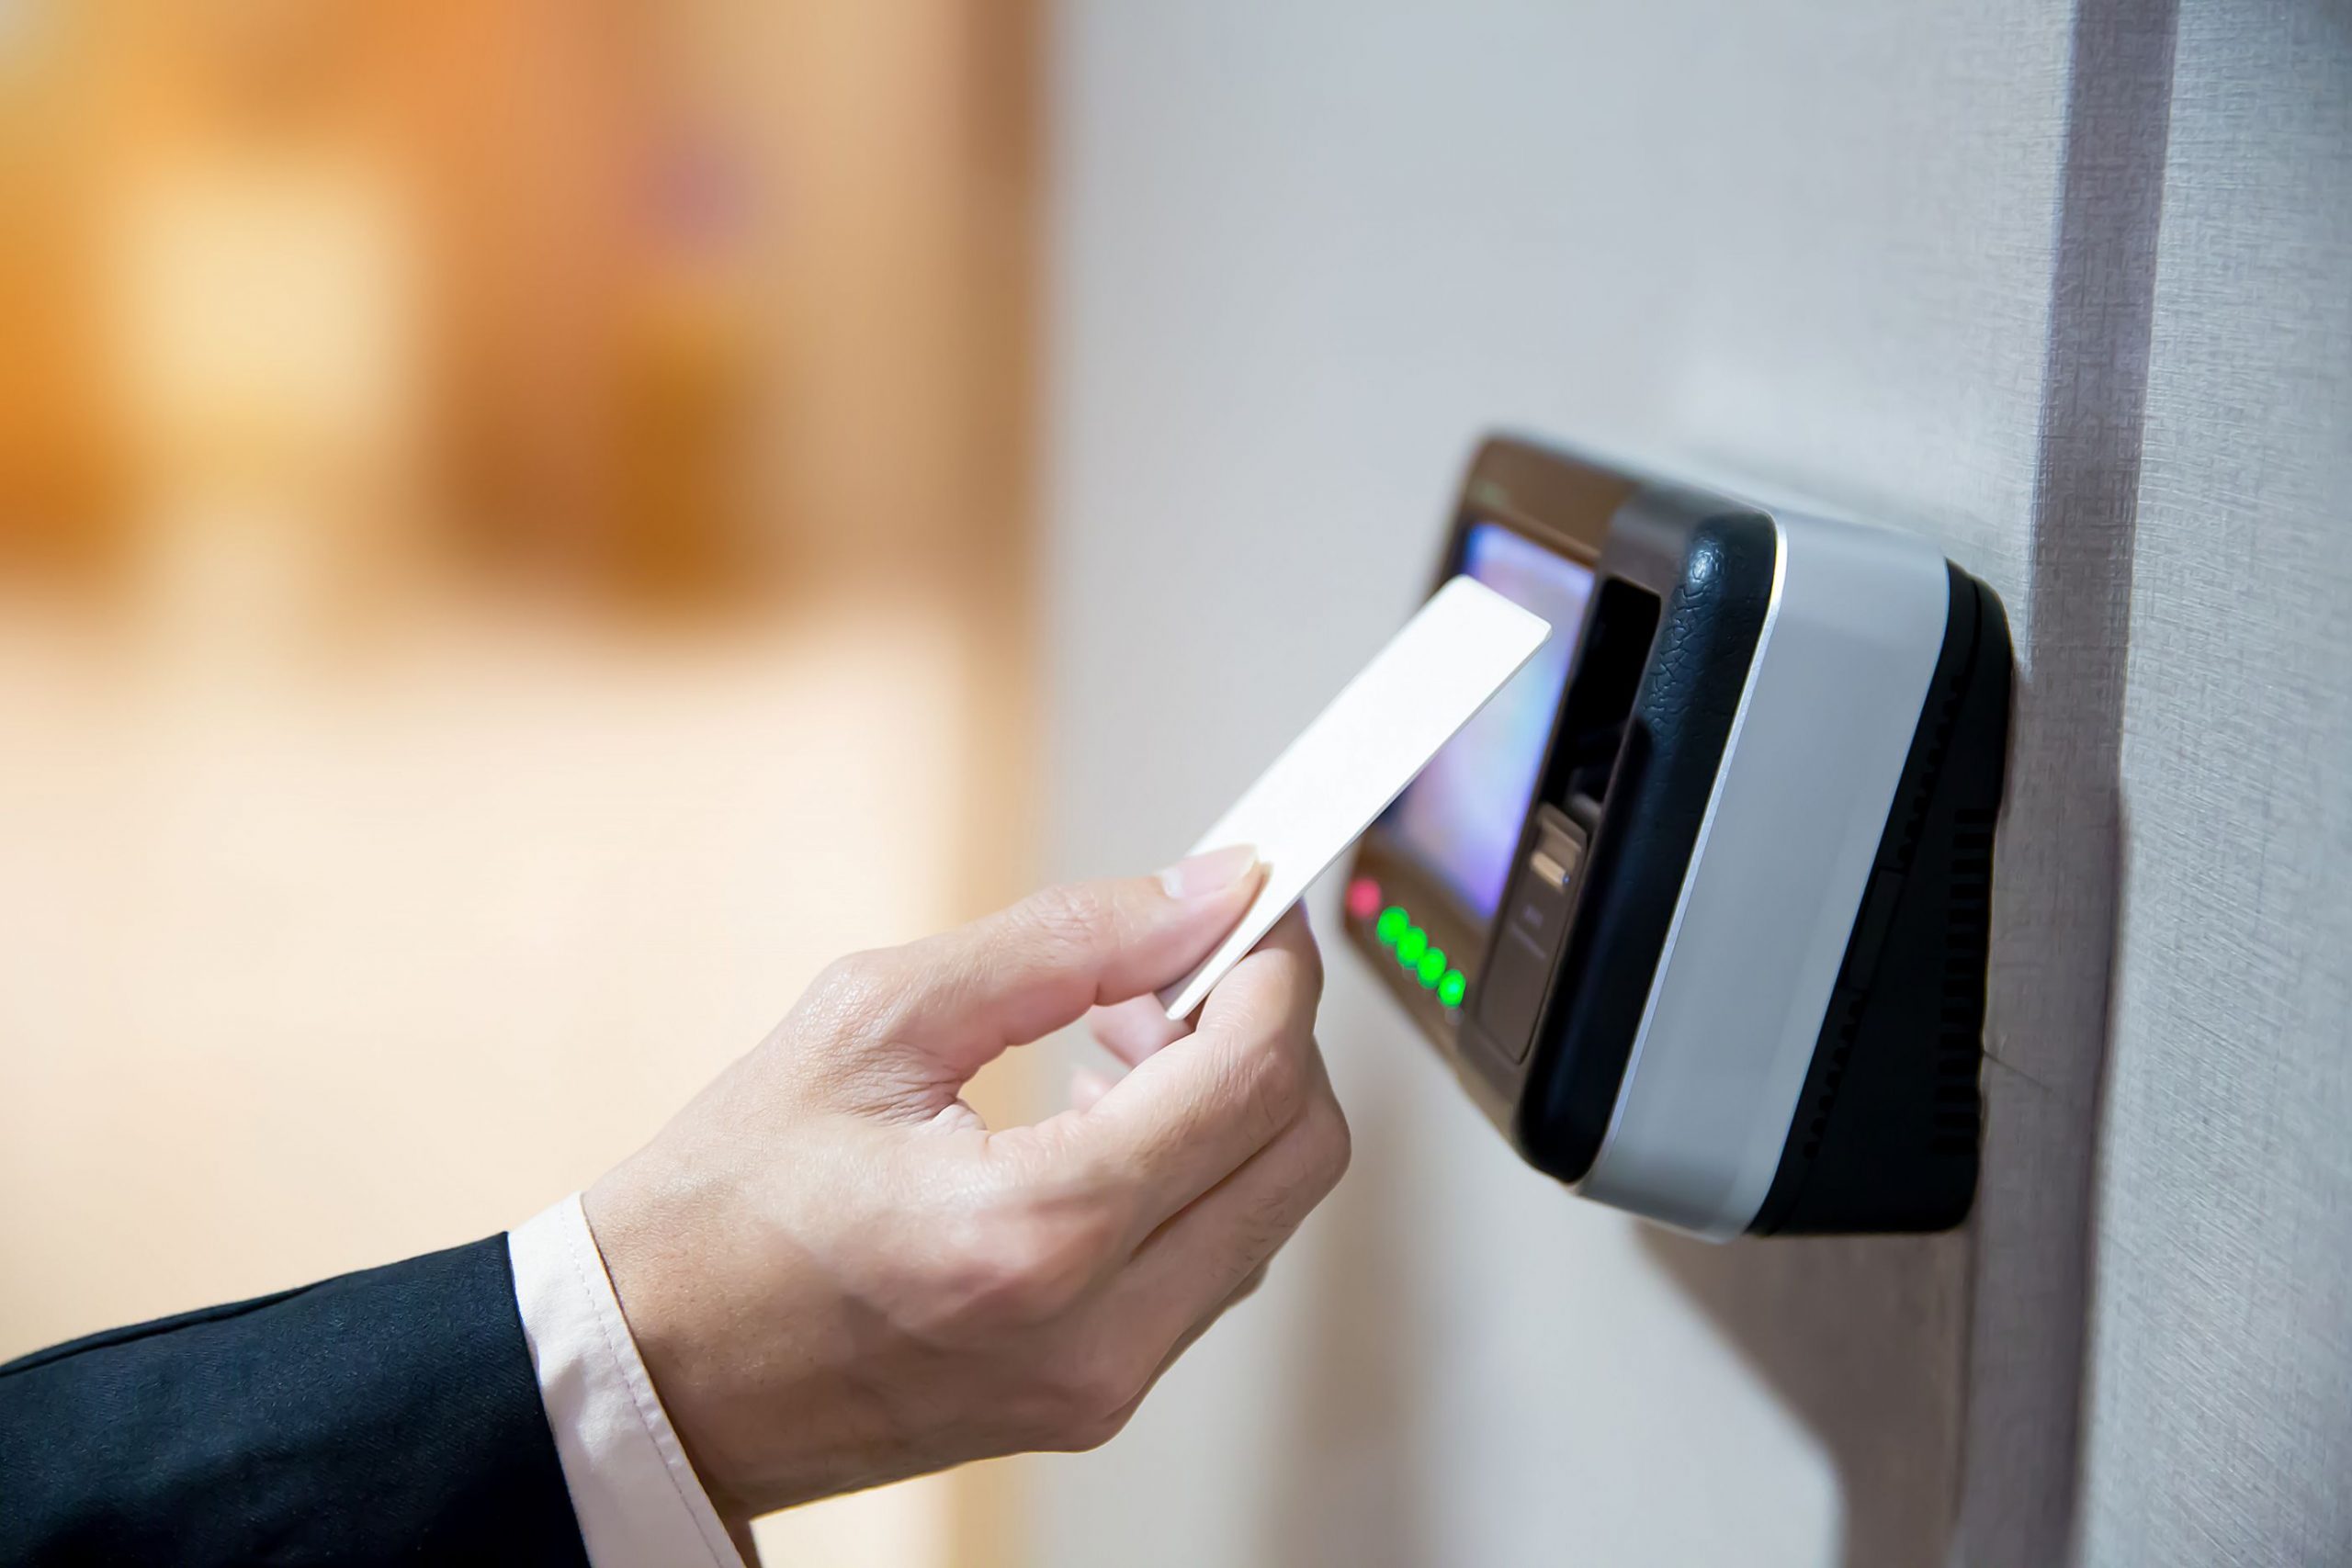 access control systems